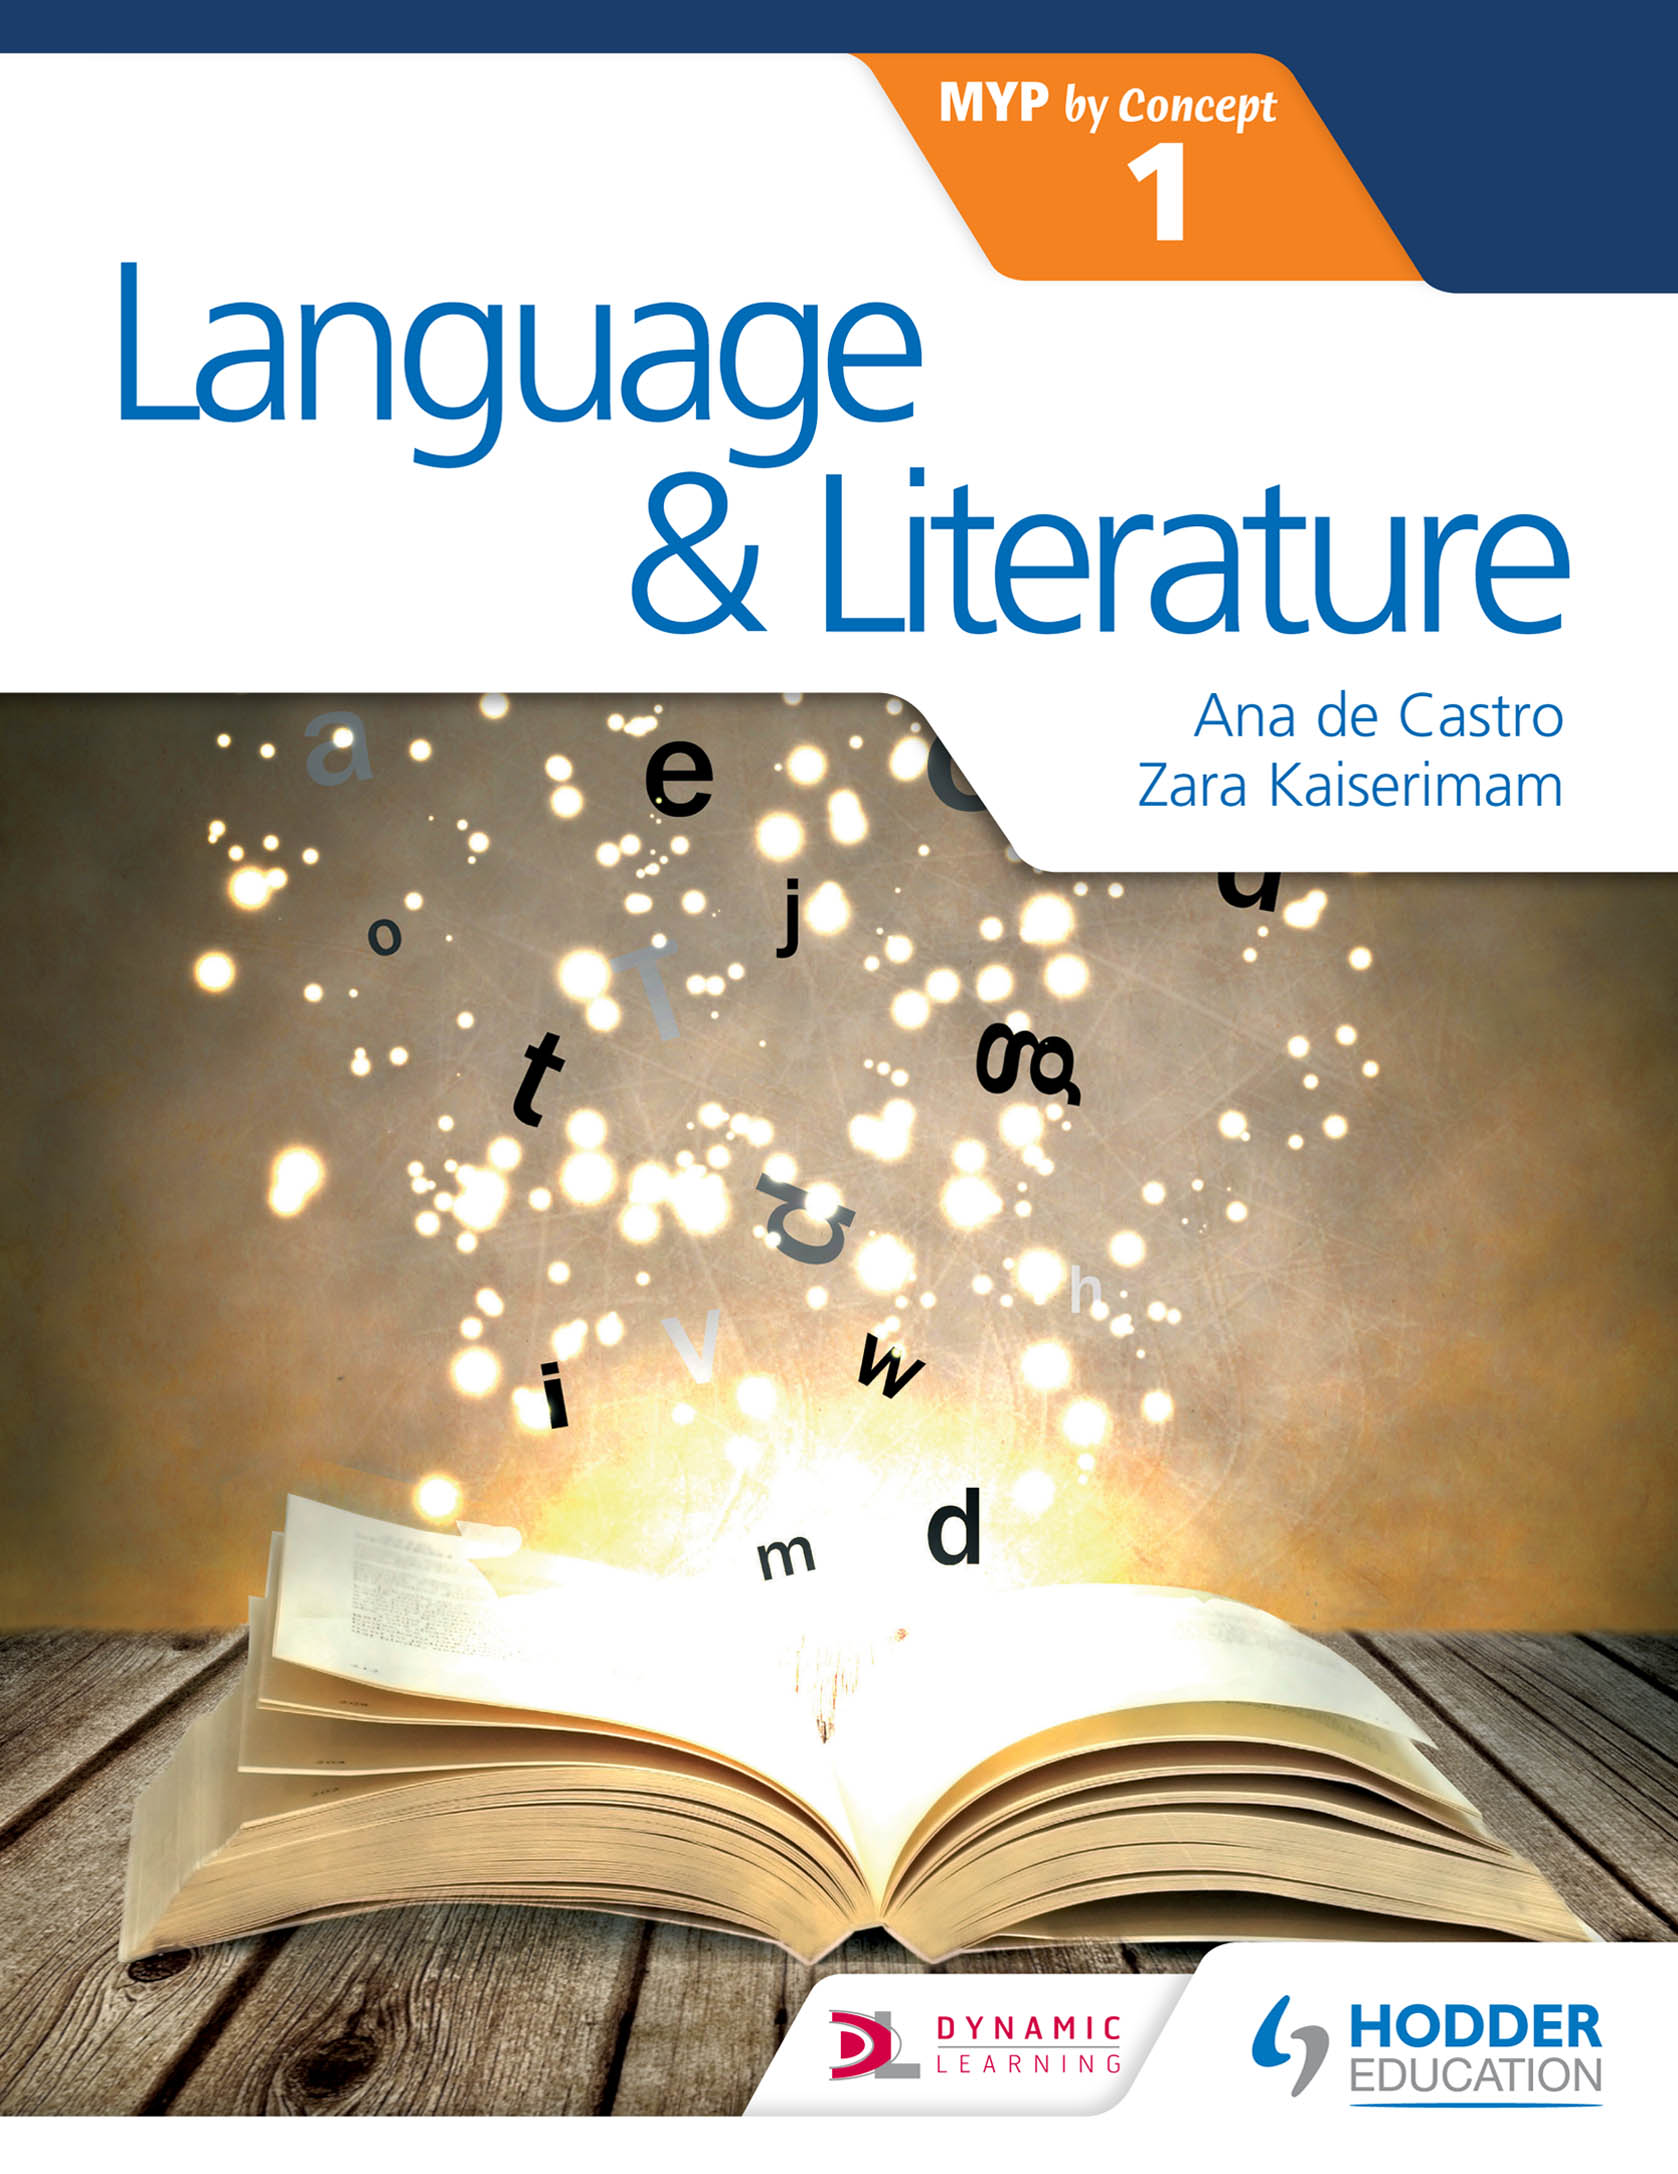 Language and Literature for the IB MYP 1